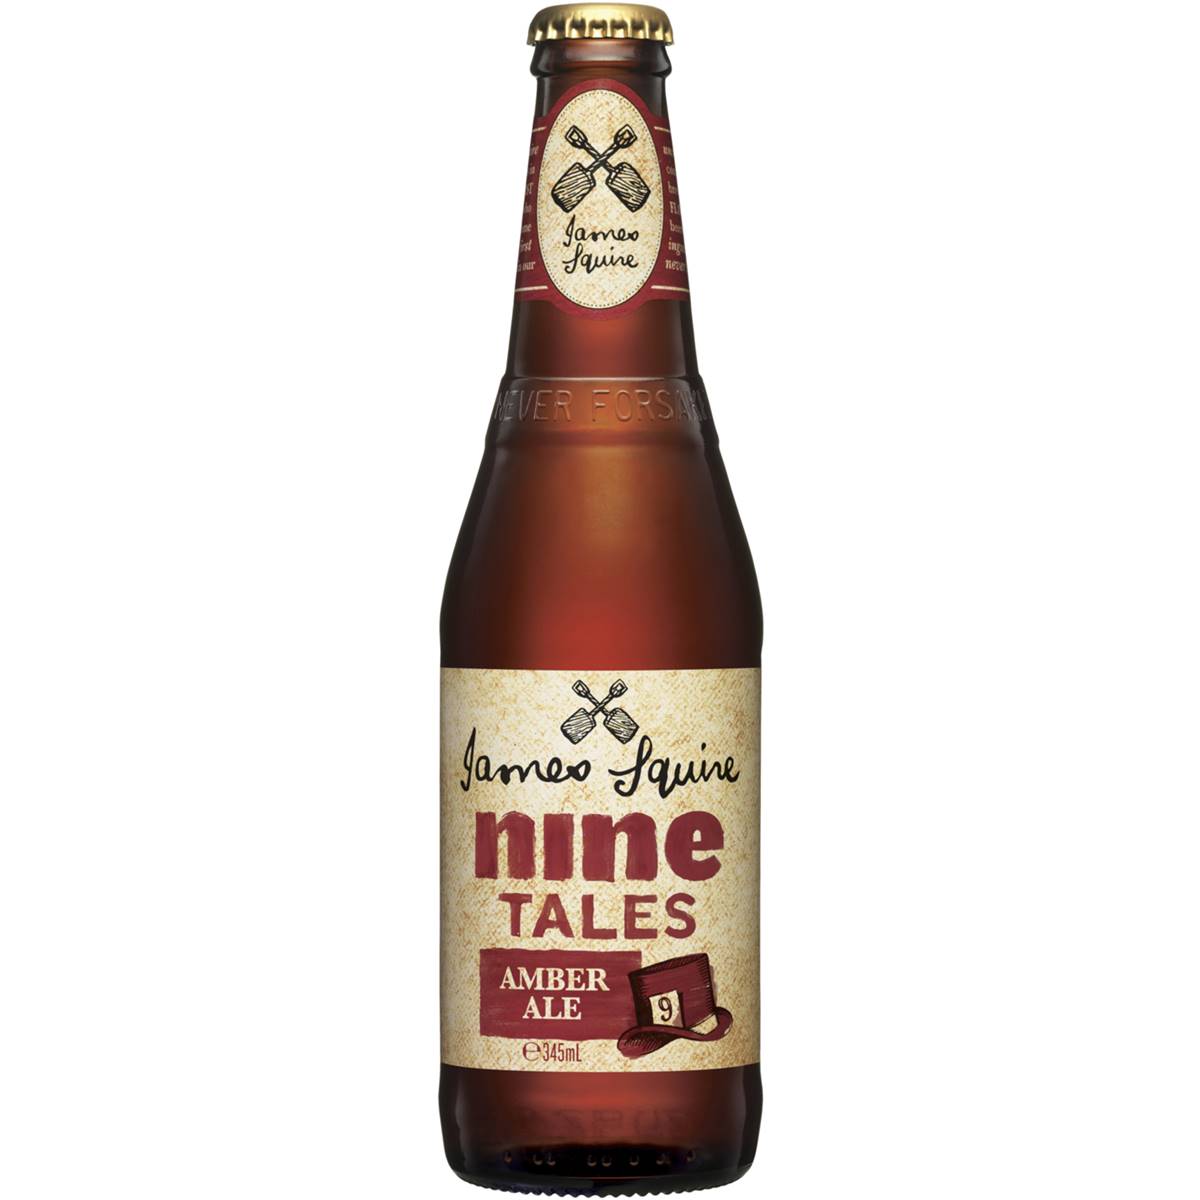 James Squire Nine Tails Amber Ale Bottle